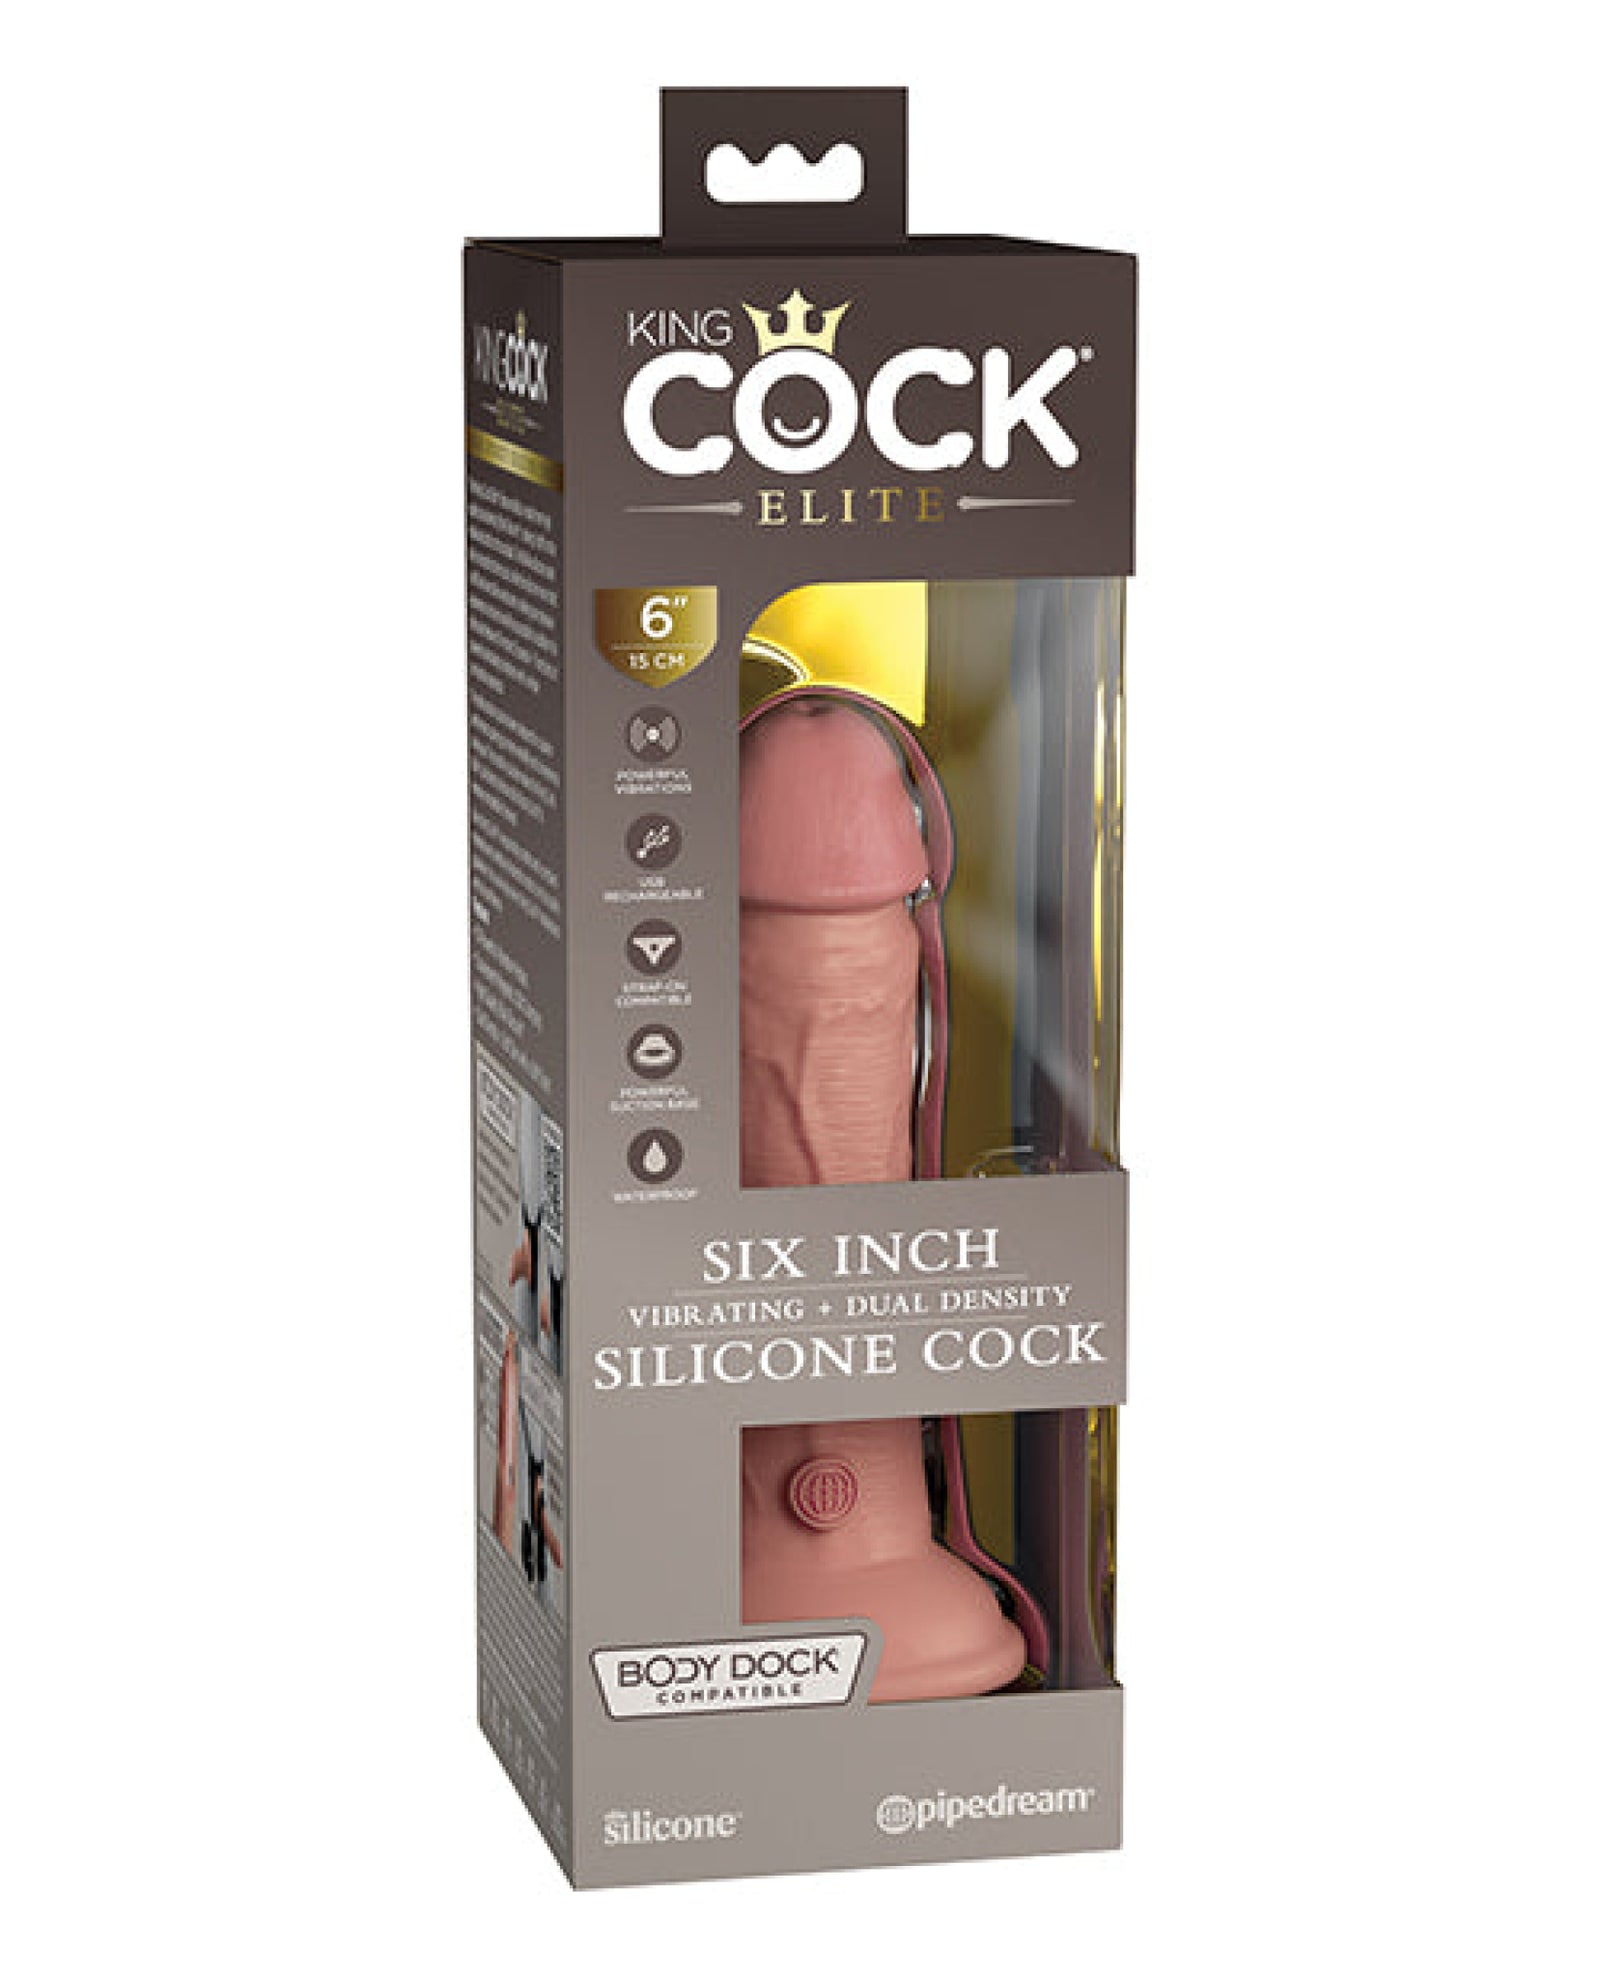 King Cock Elite 6" Dual Density Vibrating Silicone Cock Pipedream®